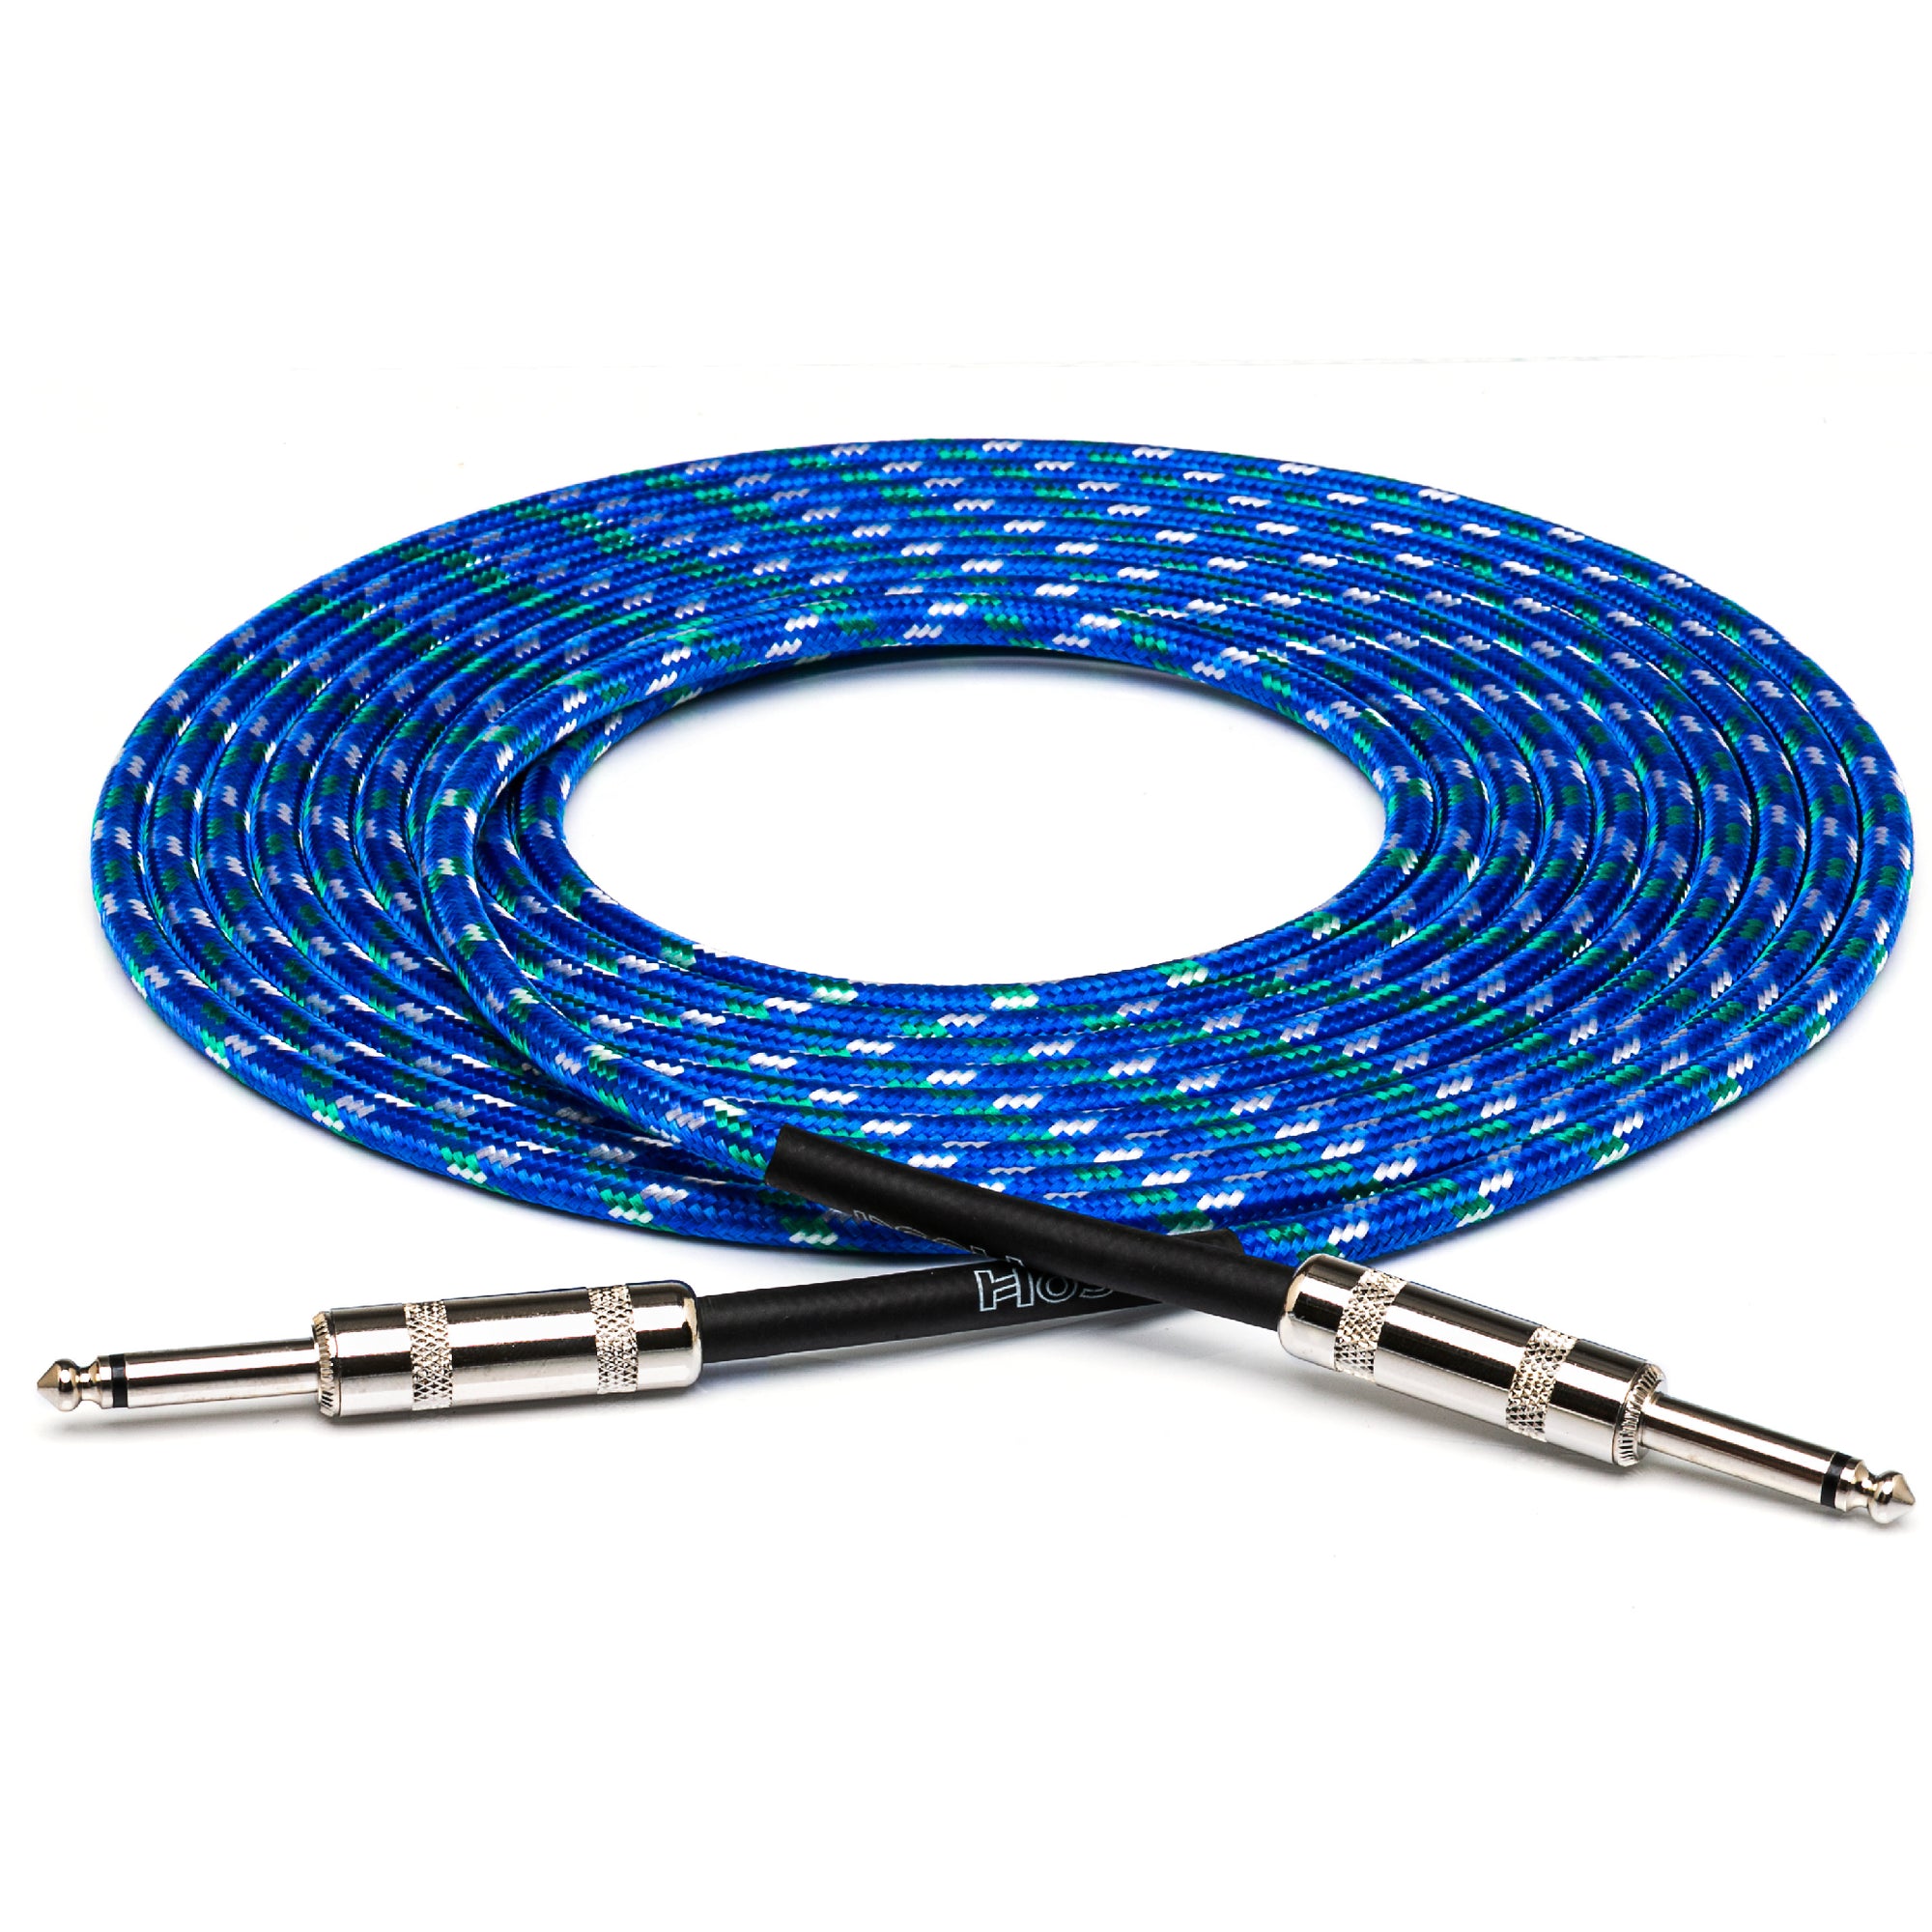 Hosa 3GT-18C2 18ft Blue/Green/White Cloth Guitar Cable Product